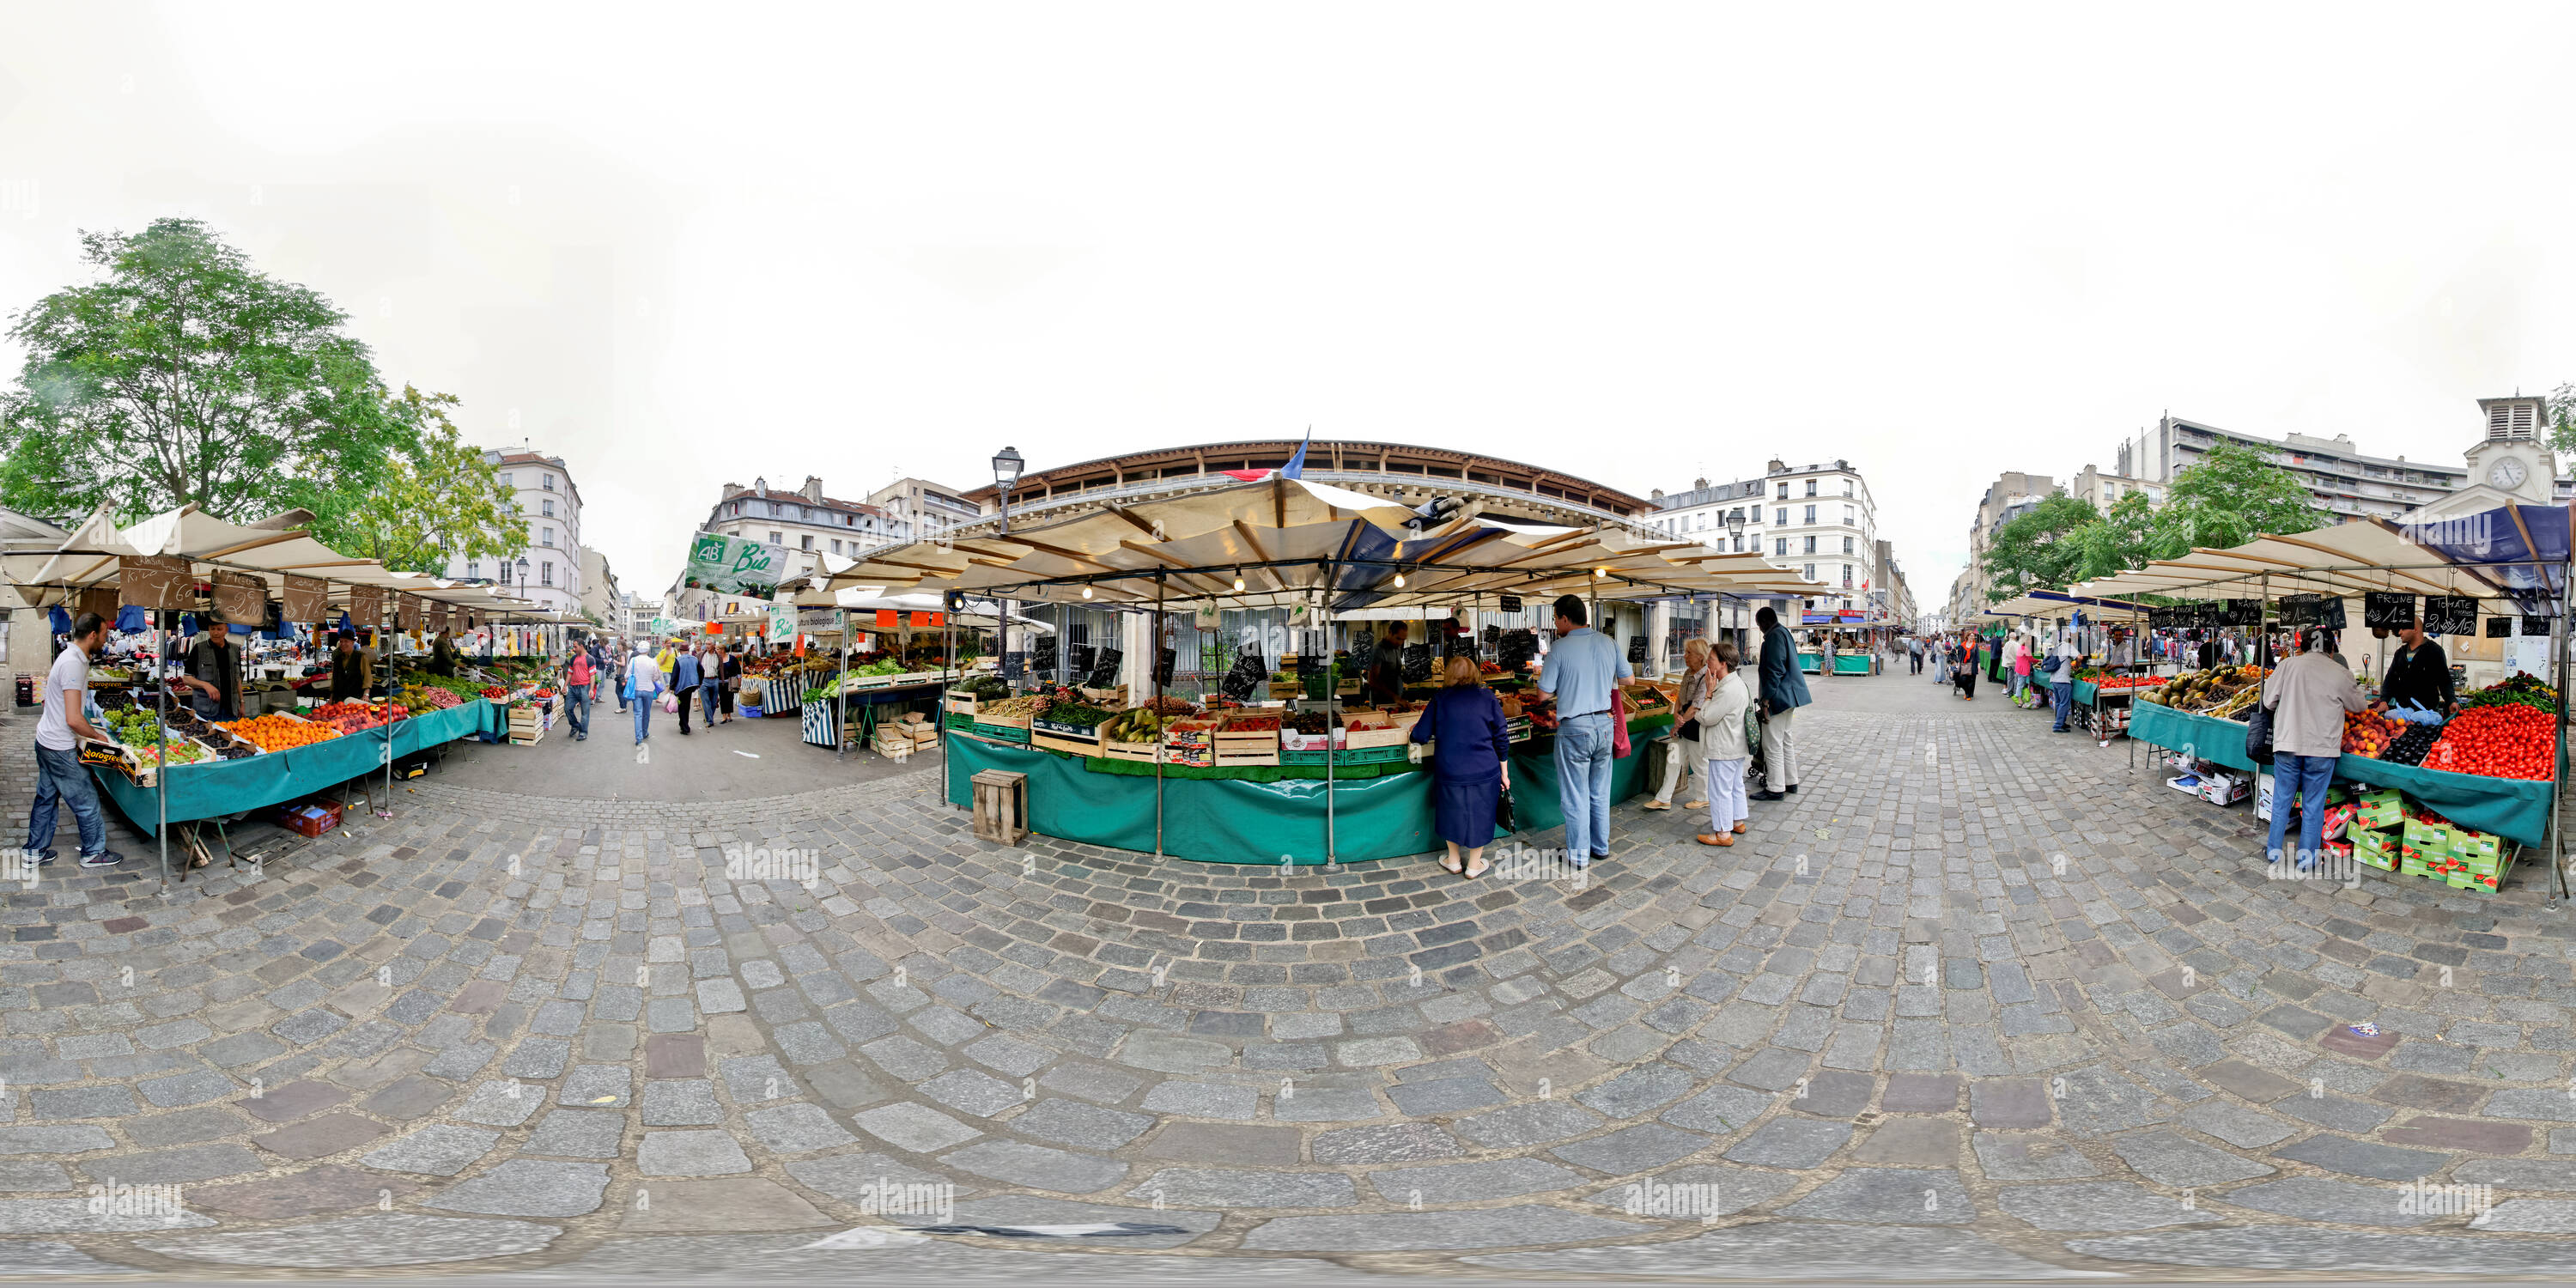 360 degree panoramic view of Beauvau Marche, Paris, France